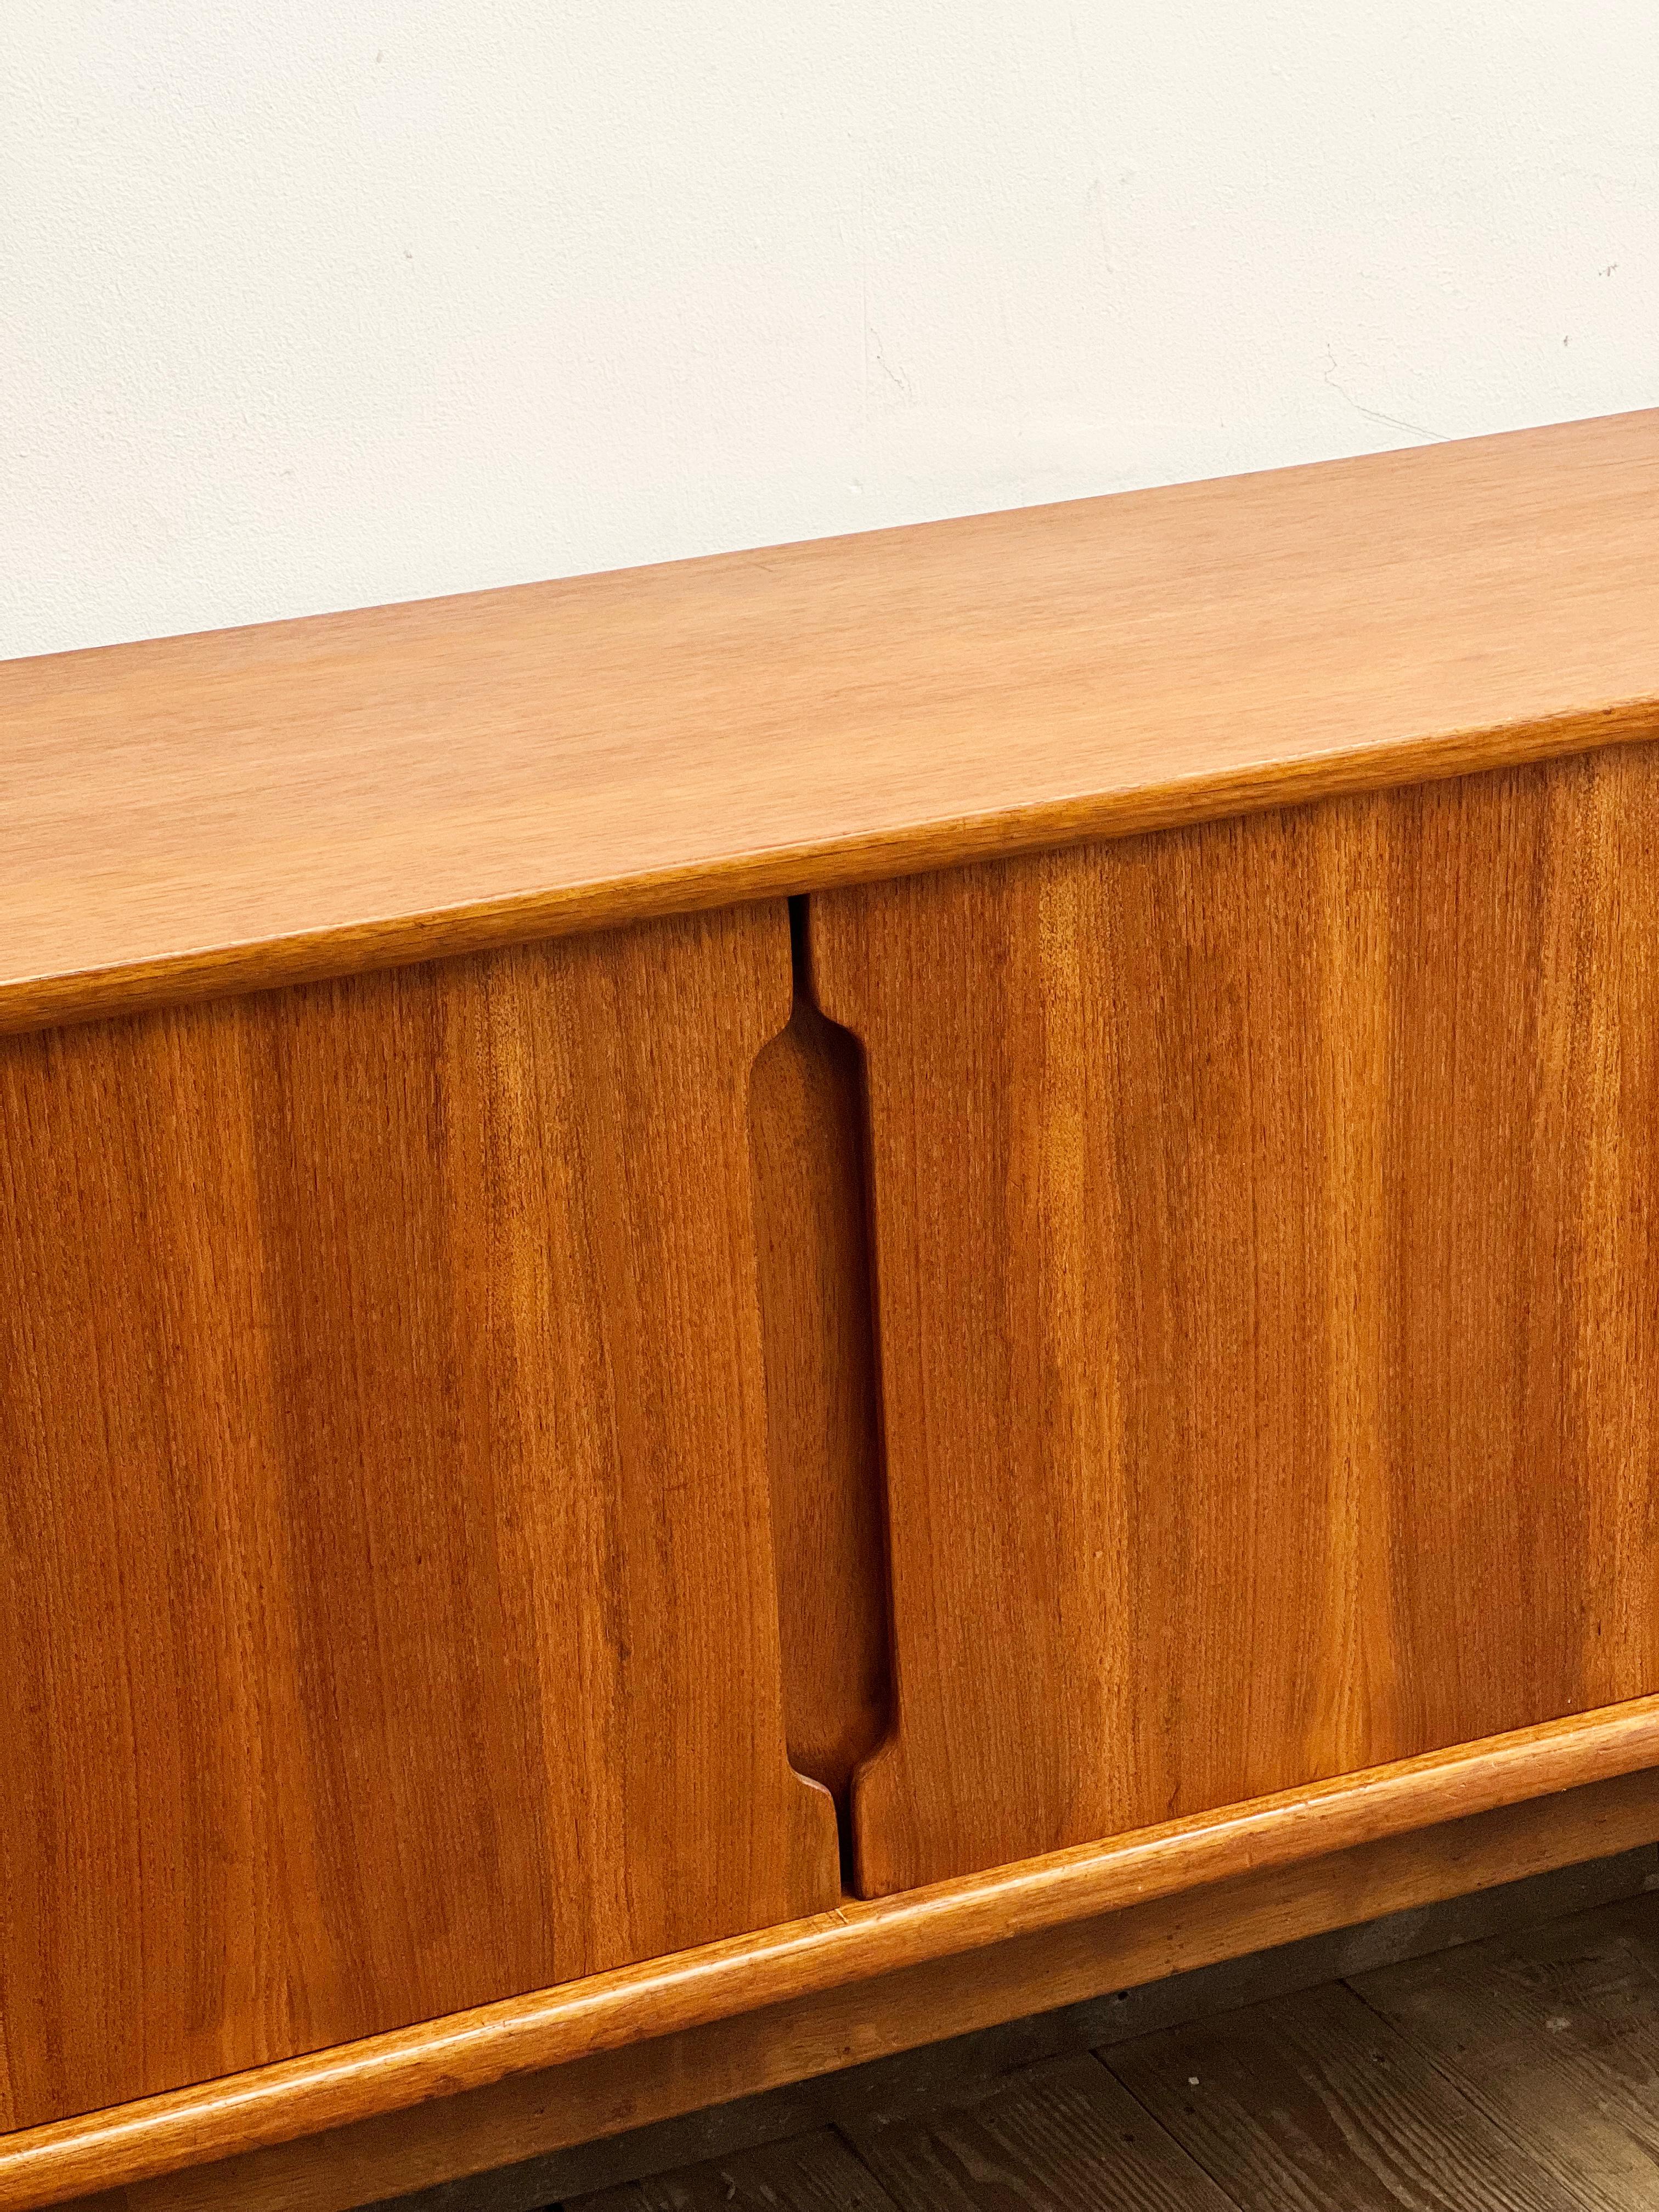 Small Mid-Century Modern Fredericia Sideboard in Teak, Germany, 1950s For Sale 3